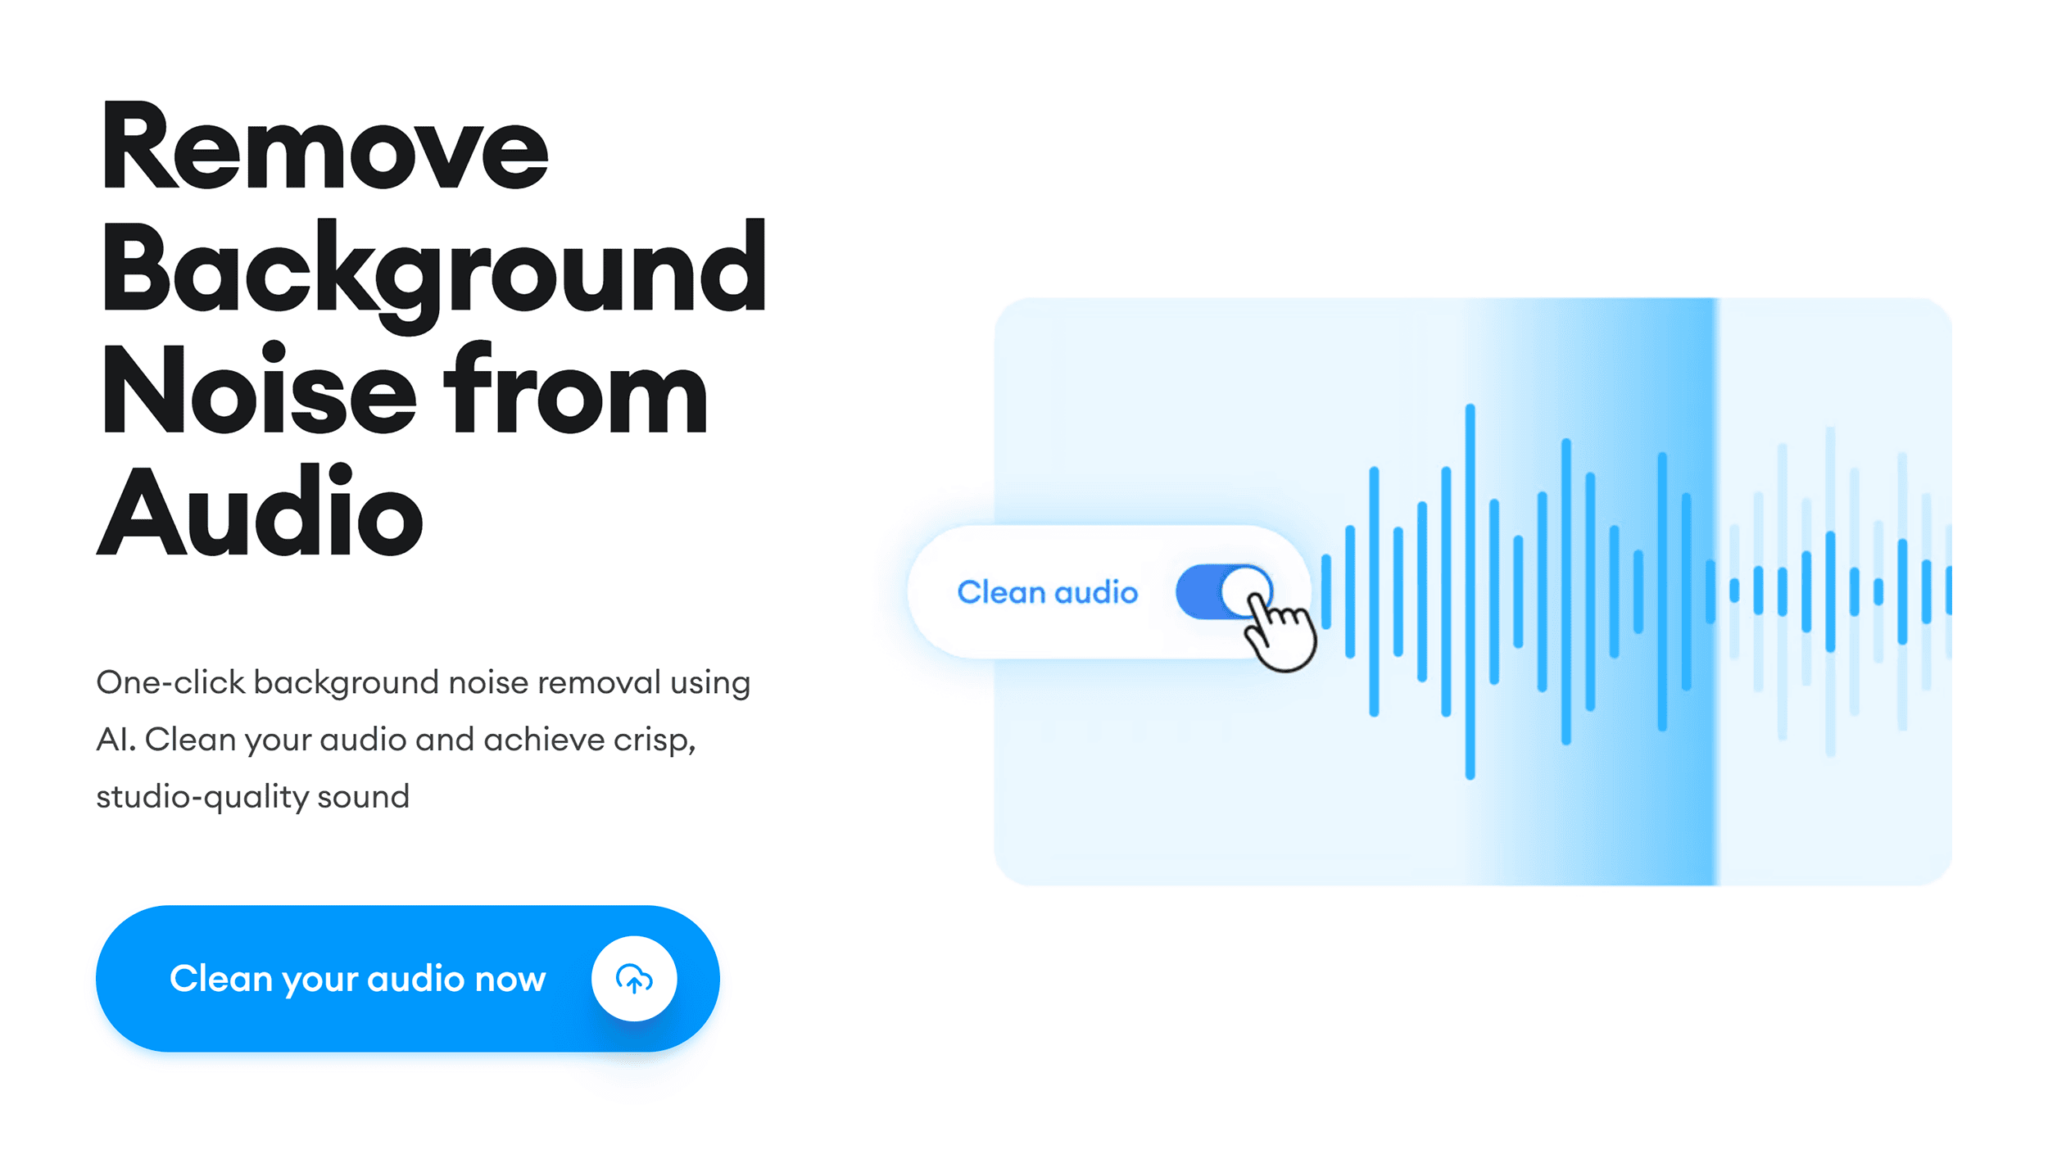 veed-io-remove-audio-noise 29 Top Digital Marketing Tools for Every Budget